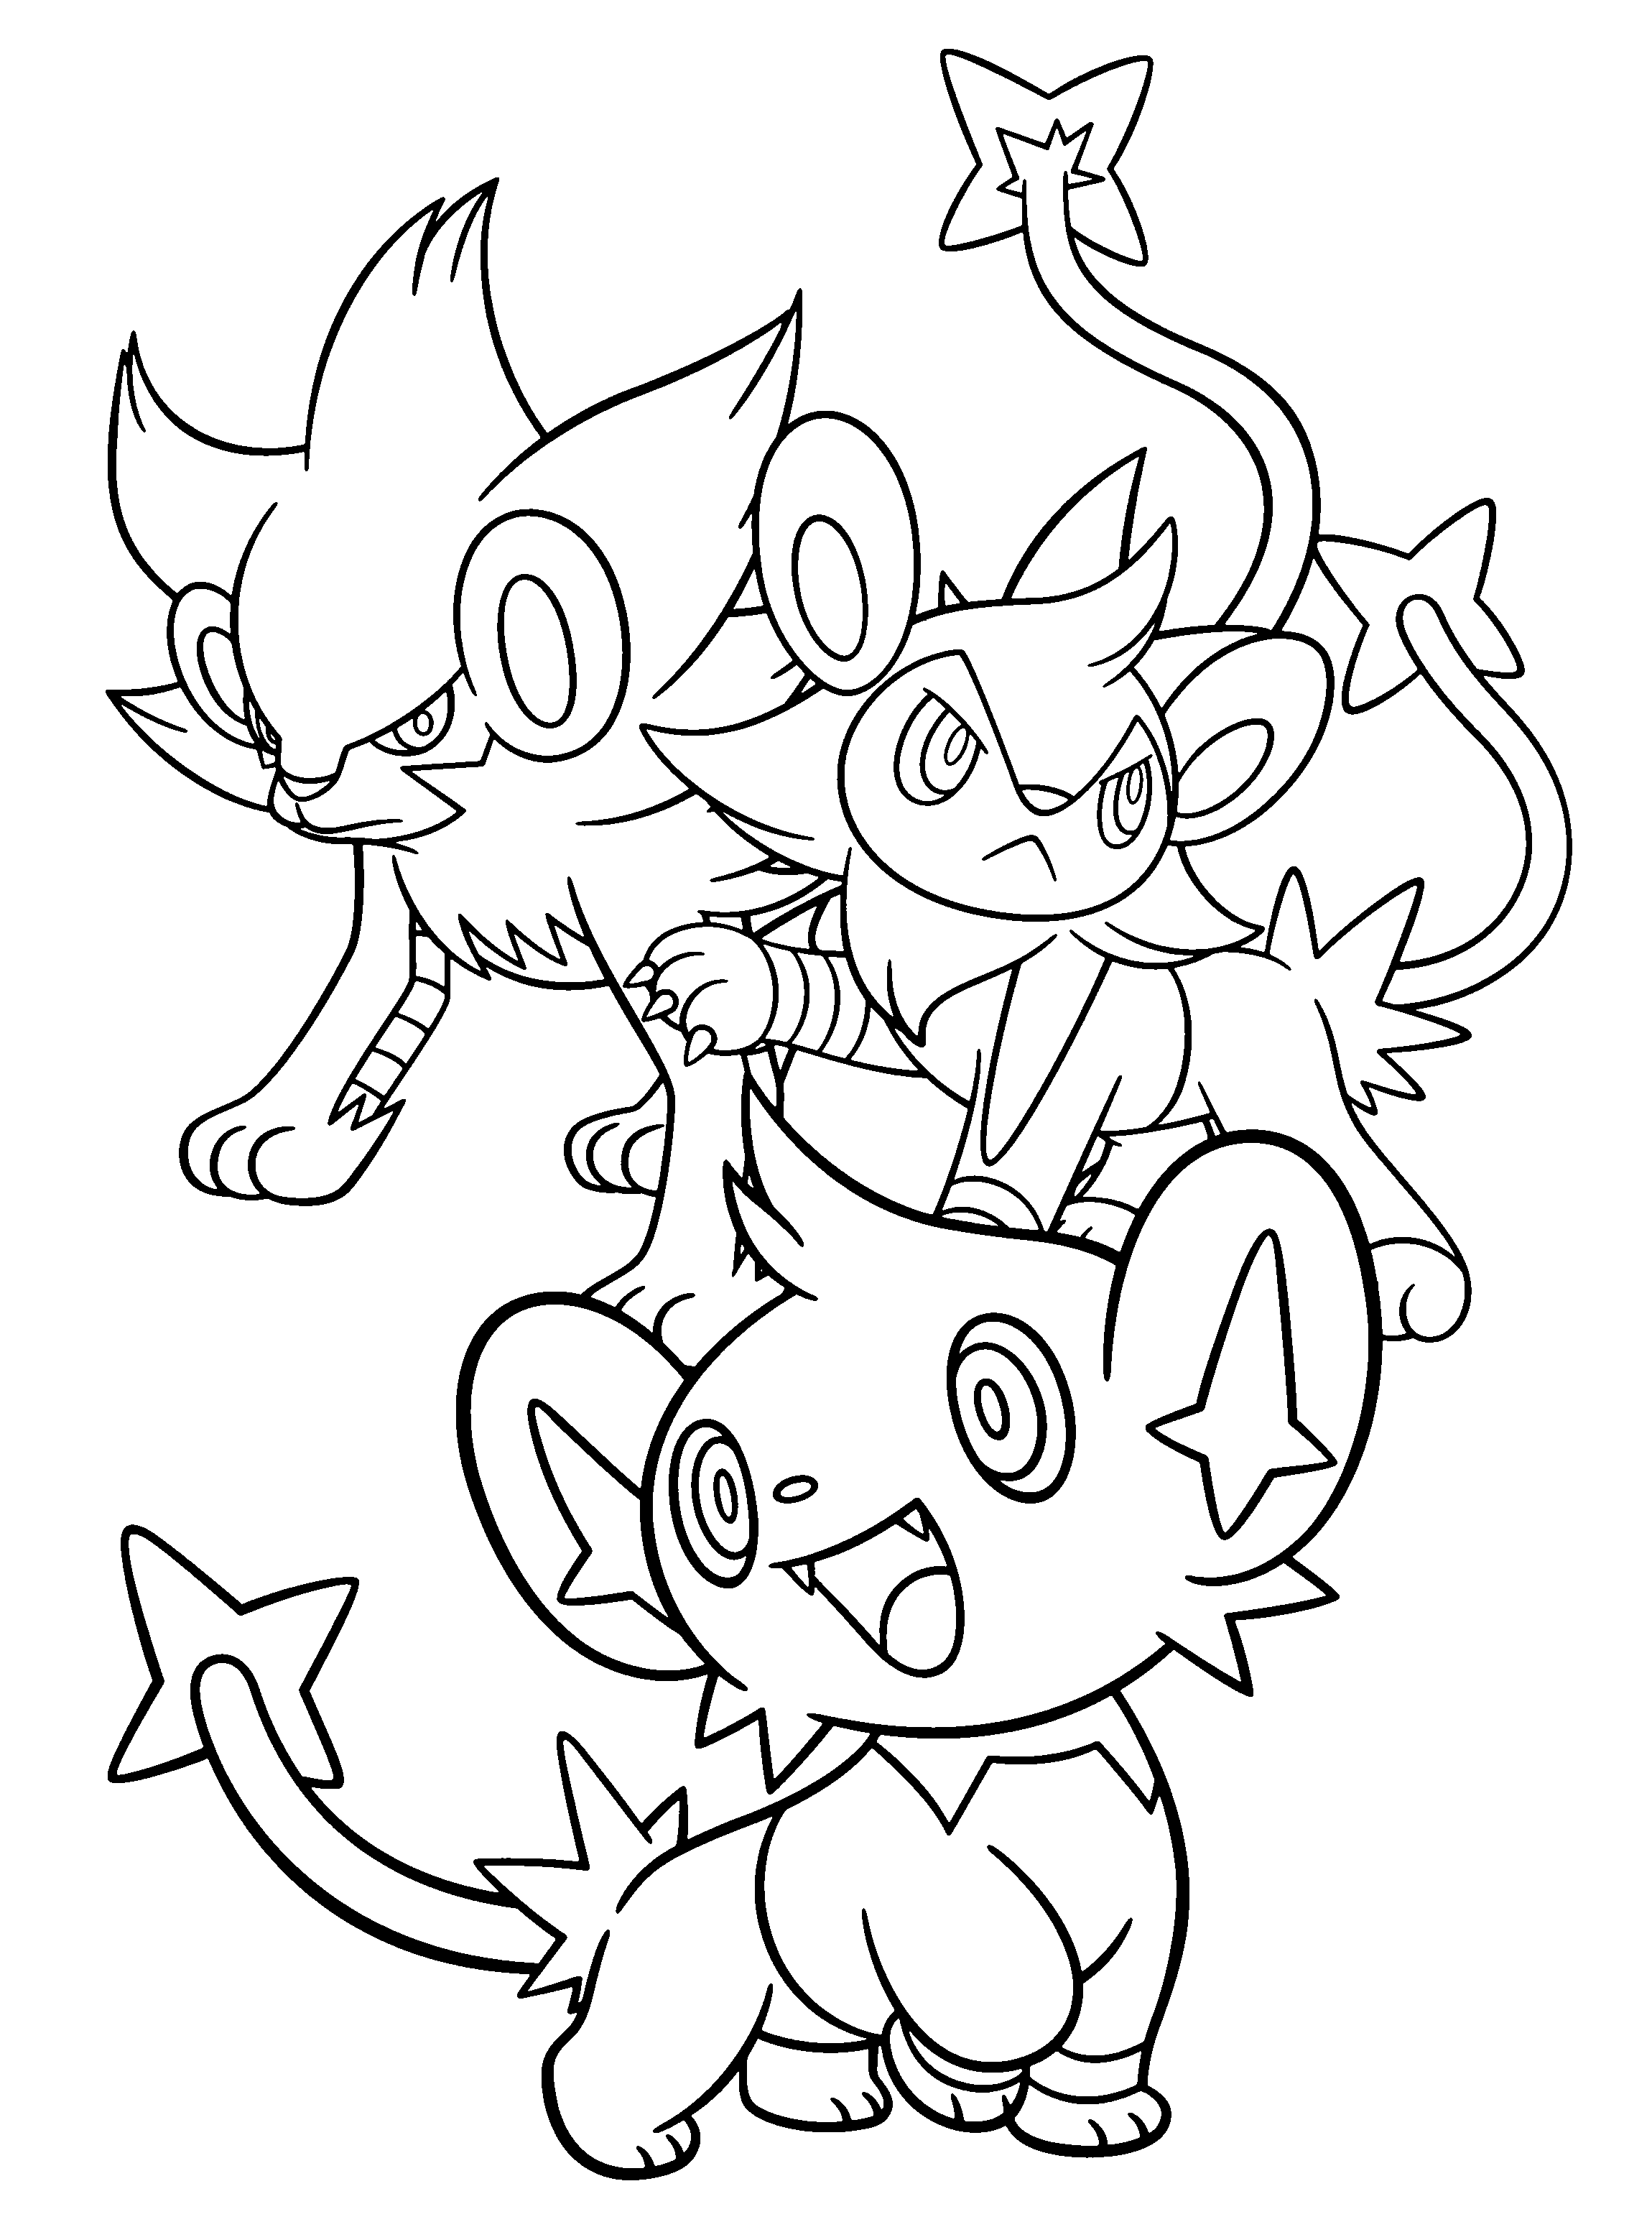 shinx coloring pages shinx lineart 2 by michy123 on deviantart pokemon sketch pages coloring shinx 